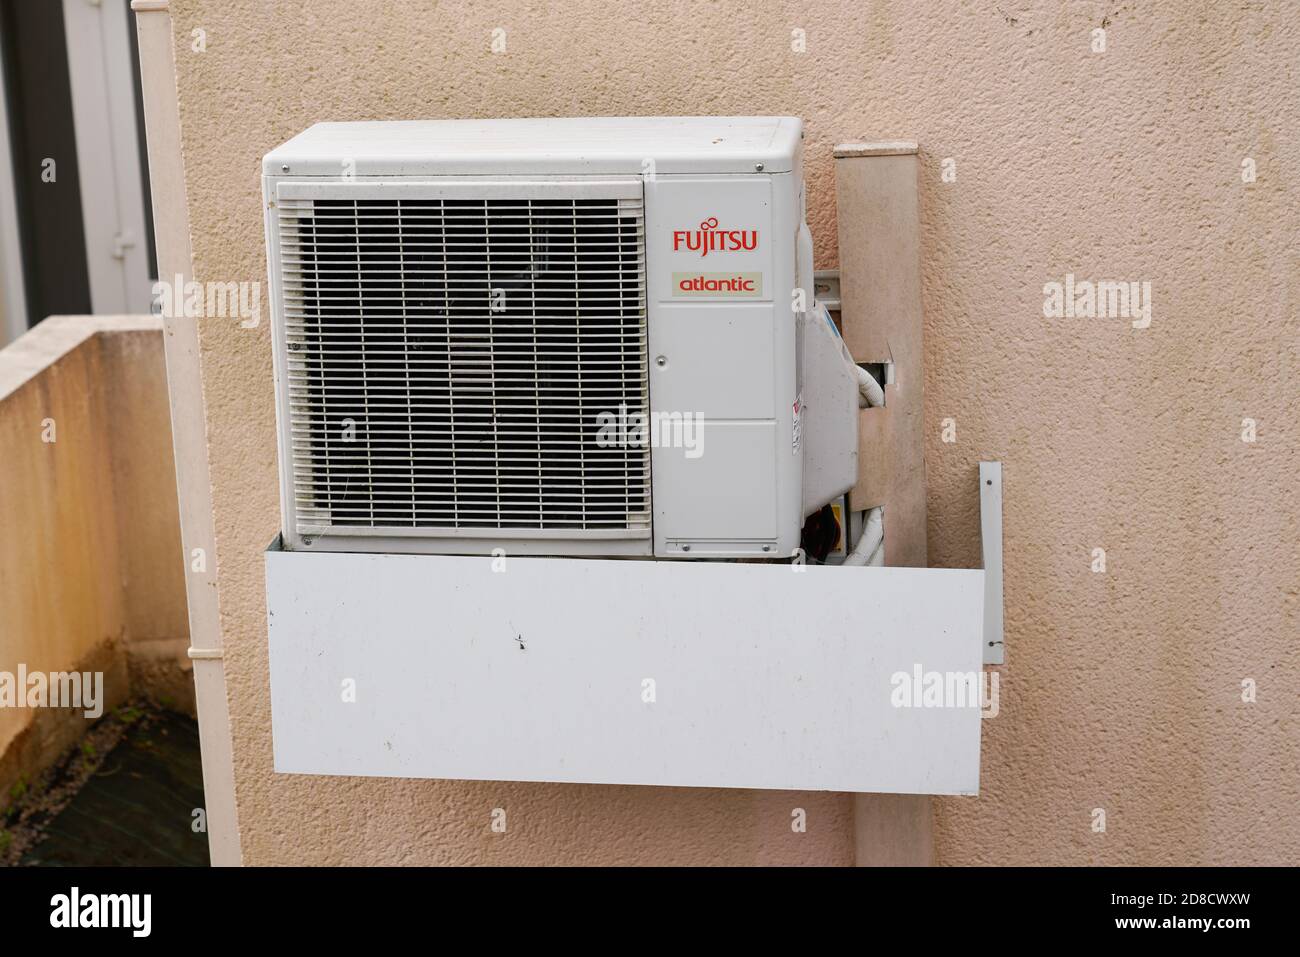 Bordeaux , Aquitaine / France - 10 20 2020 : atlantic FUJITSU logo and text  sign on Air conditioning outside the building Stock Photo - Alamy